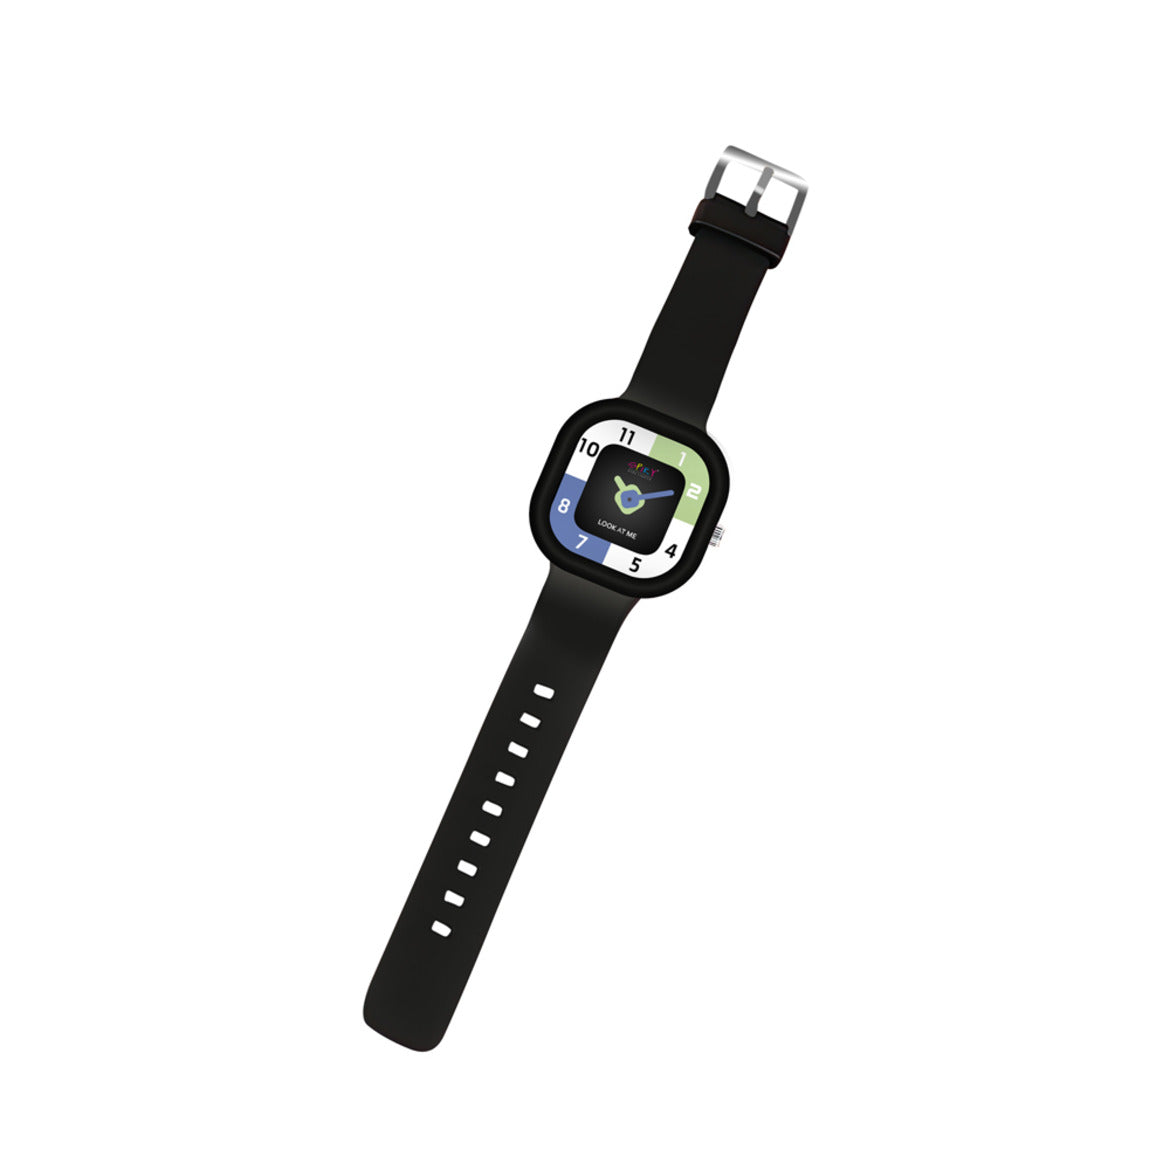 Spiky Square Analog Watch for Kids - Black